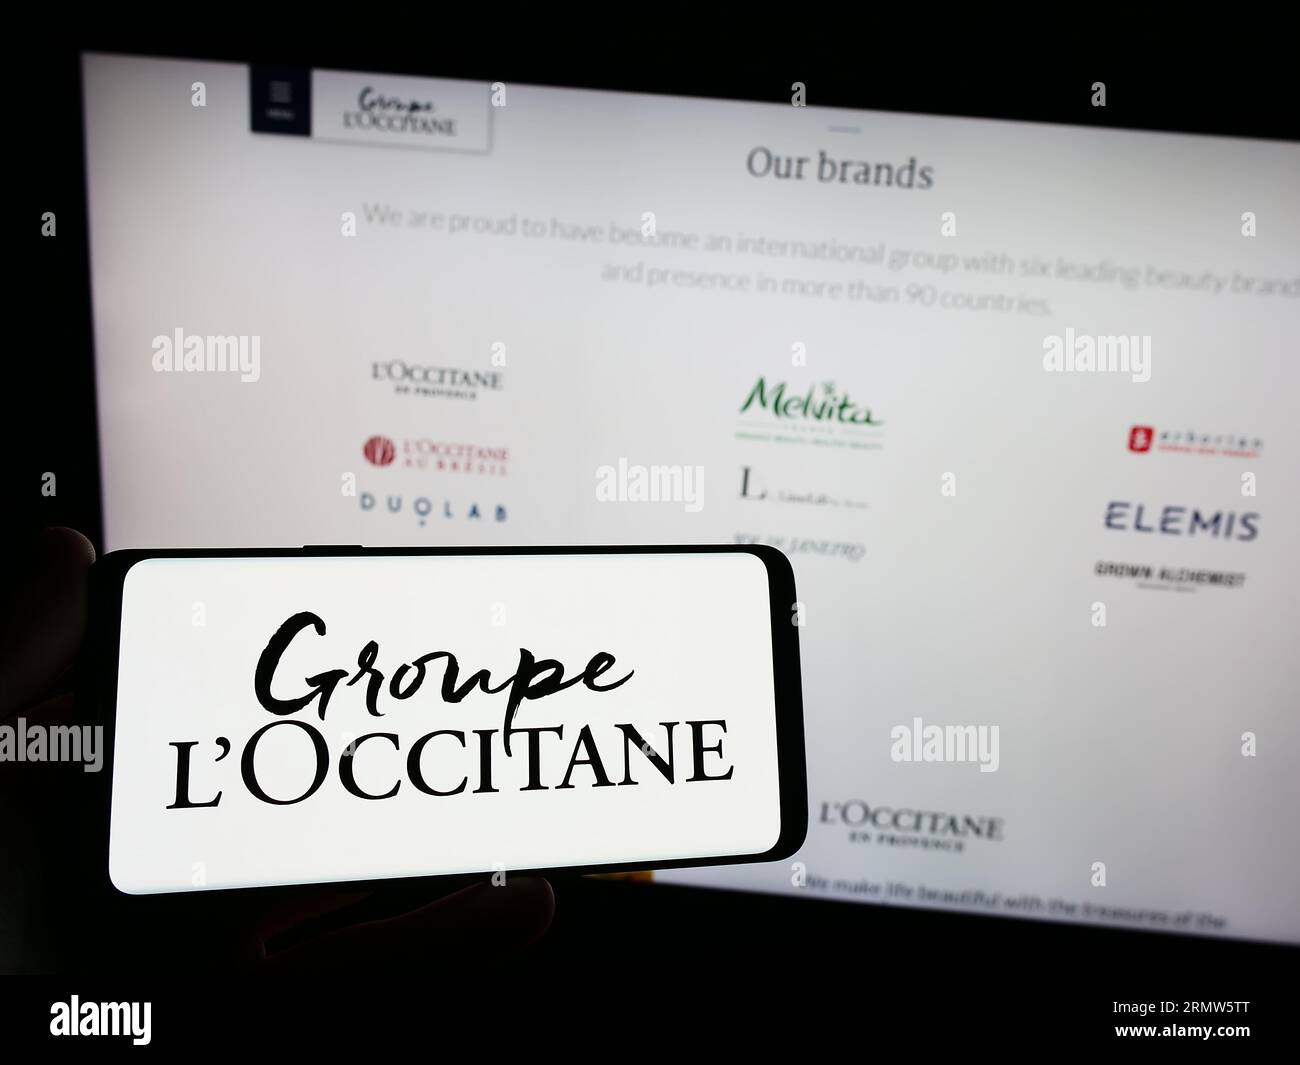 Person holding smartphone with logo of French cosmetics company Groupe L'Occitane on screen in front of website. Focus on phone display. Stock Photo